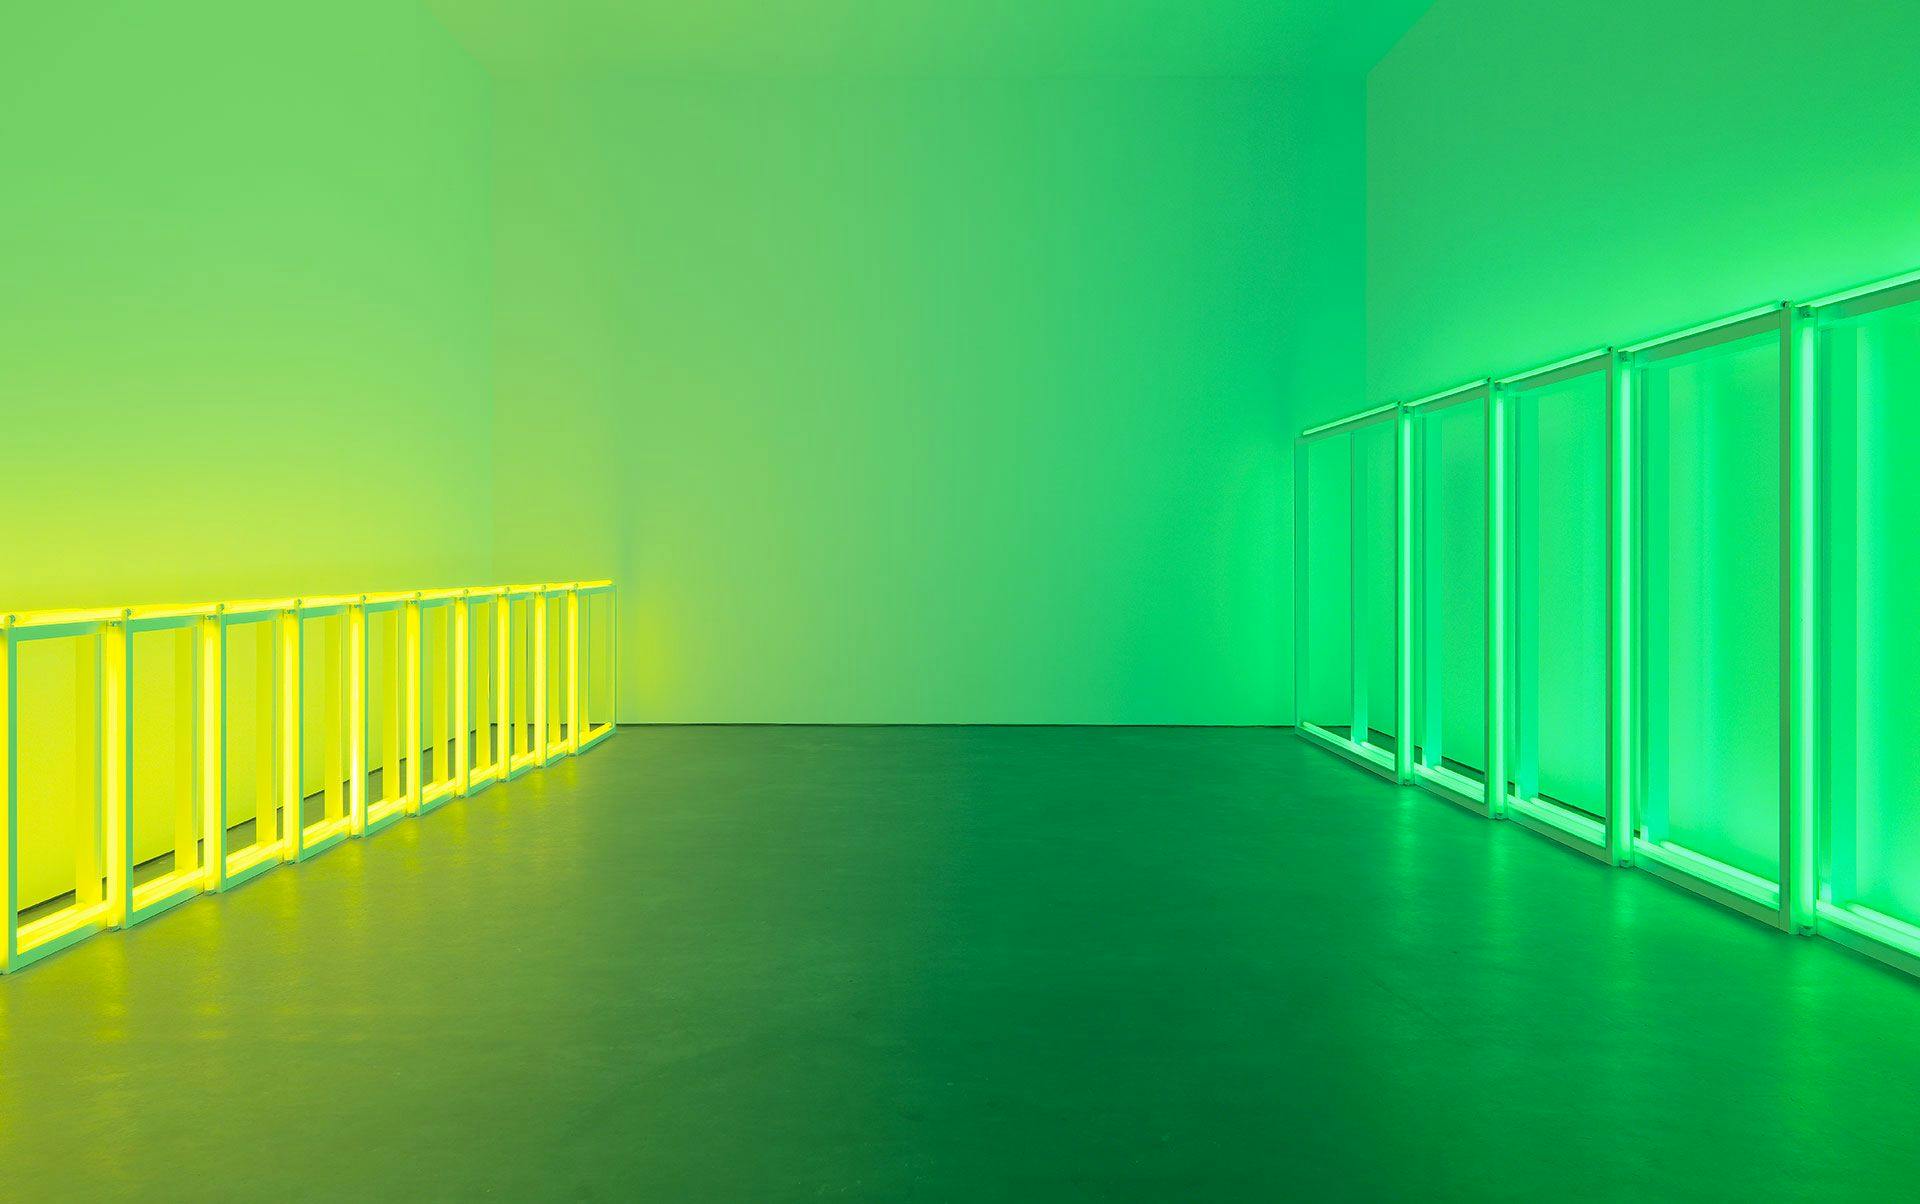 A two part sculpture in yellow and green fluorescent light by Dan Flavin, titled untitled (to Sonja), dated 1969.